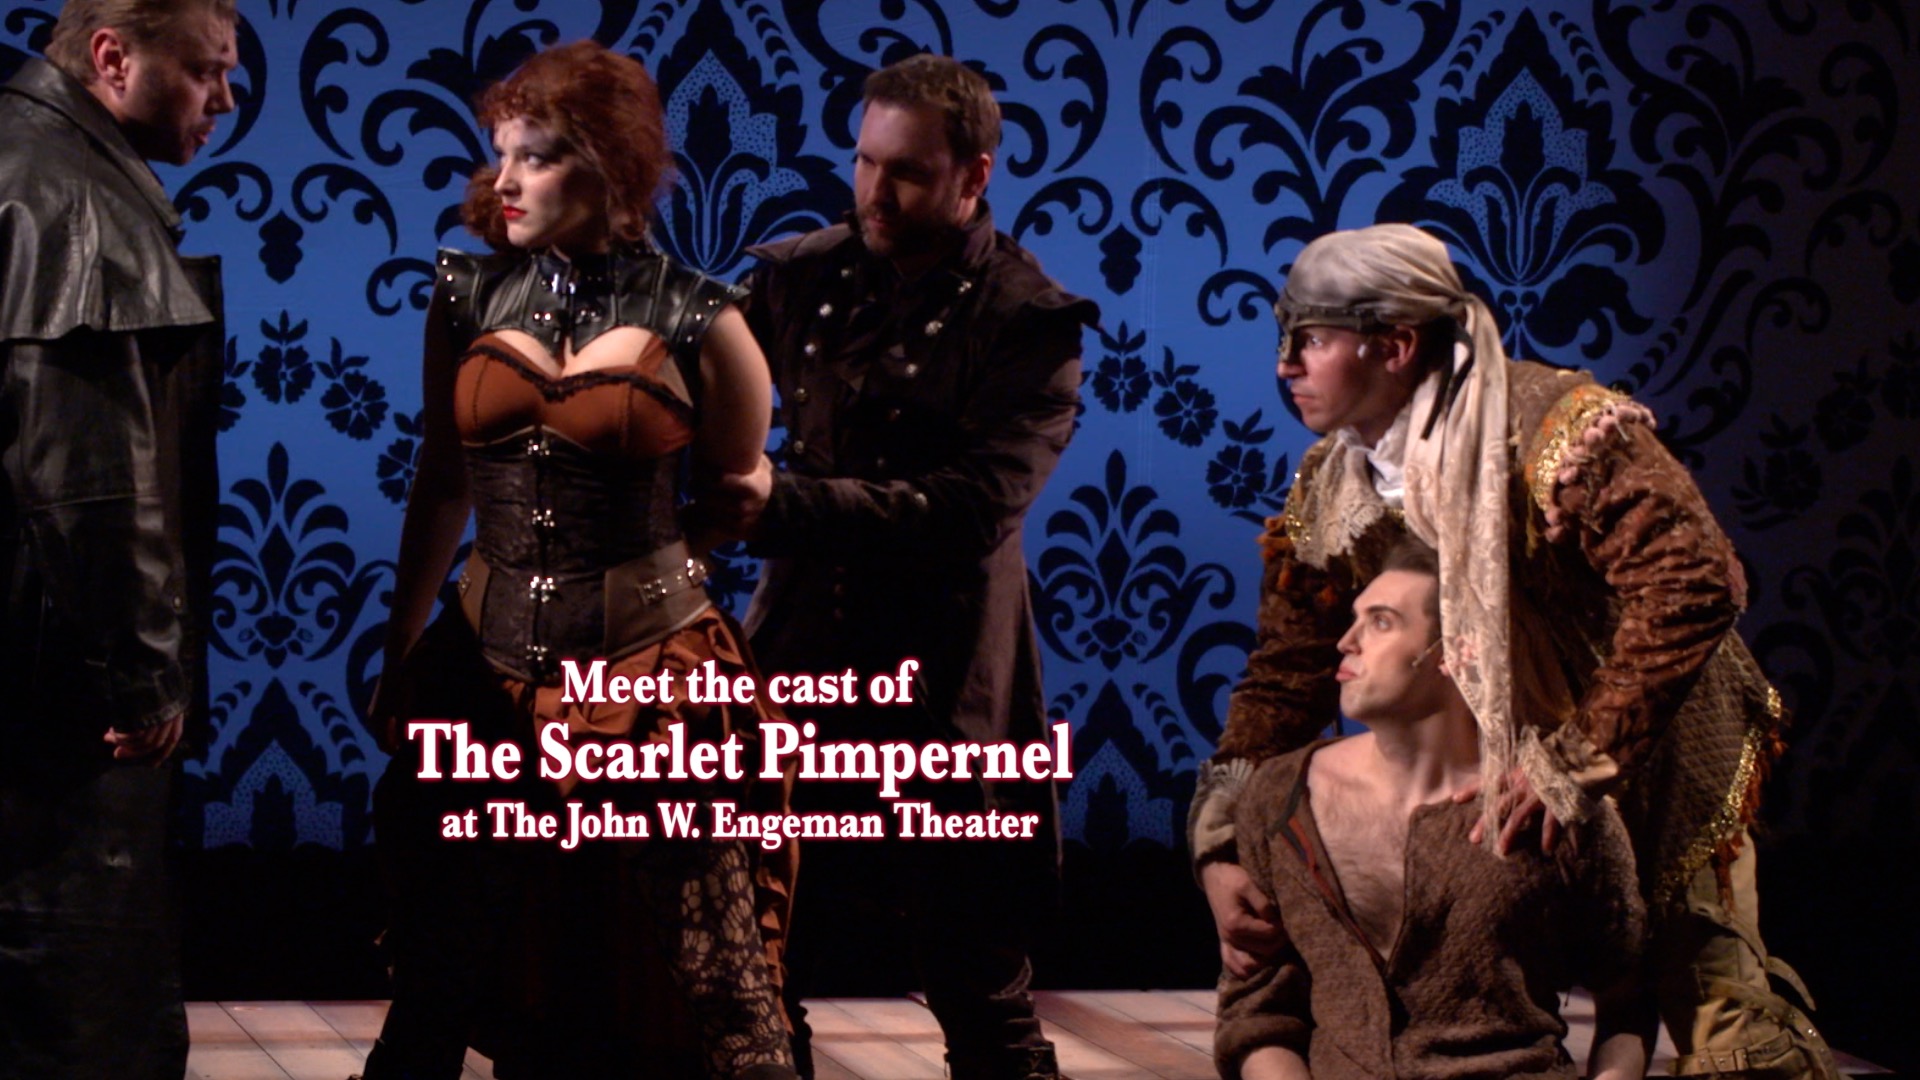 Meet the Cast of The Scarlet Pimpernel at the John W. Engeman Theater